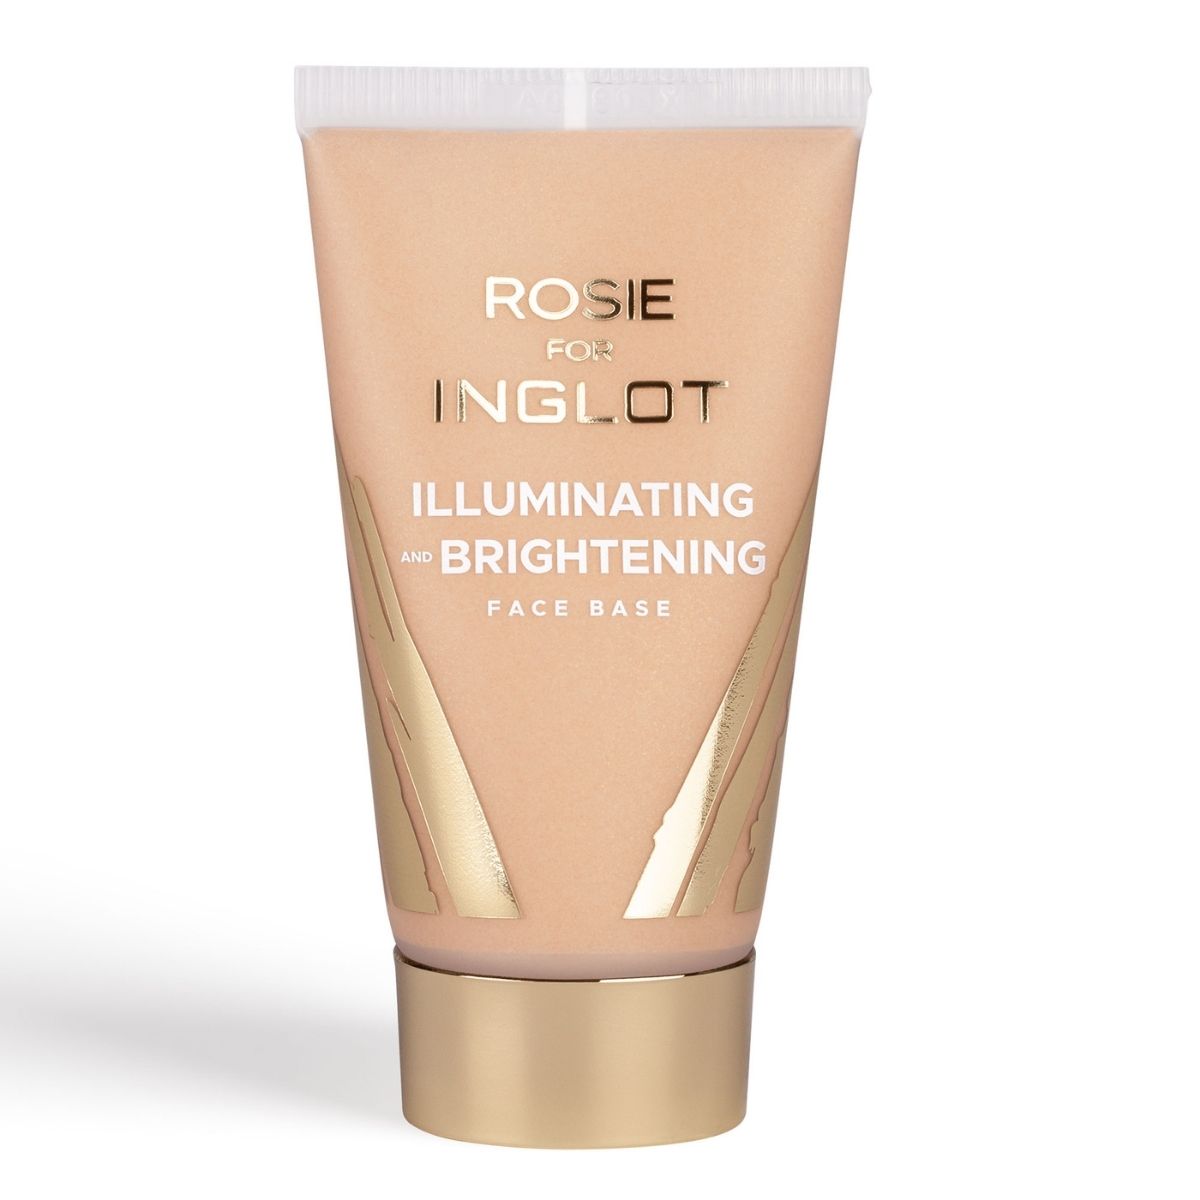 Inglot Rosie Illuminating and Brightening Face Base. 20% off